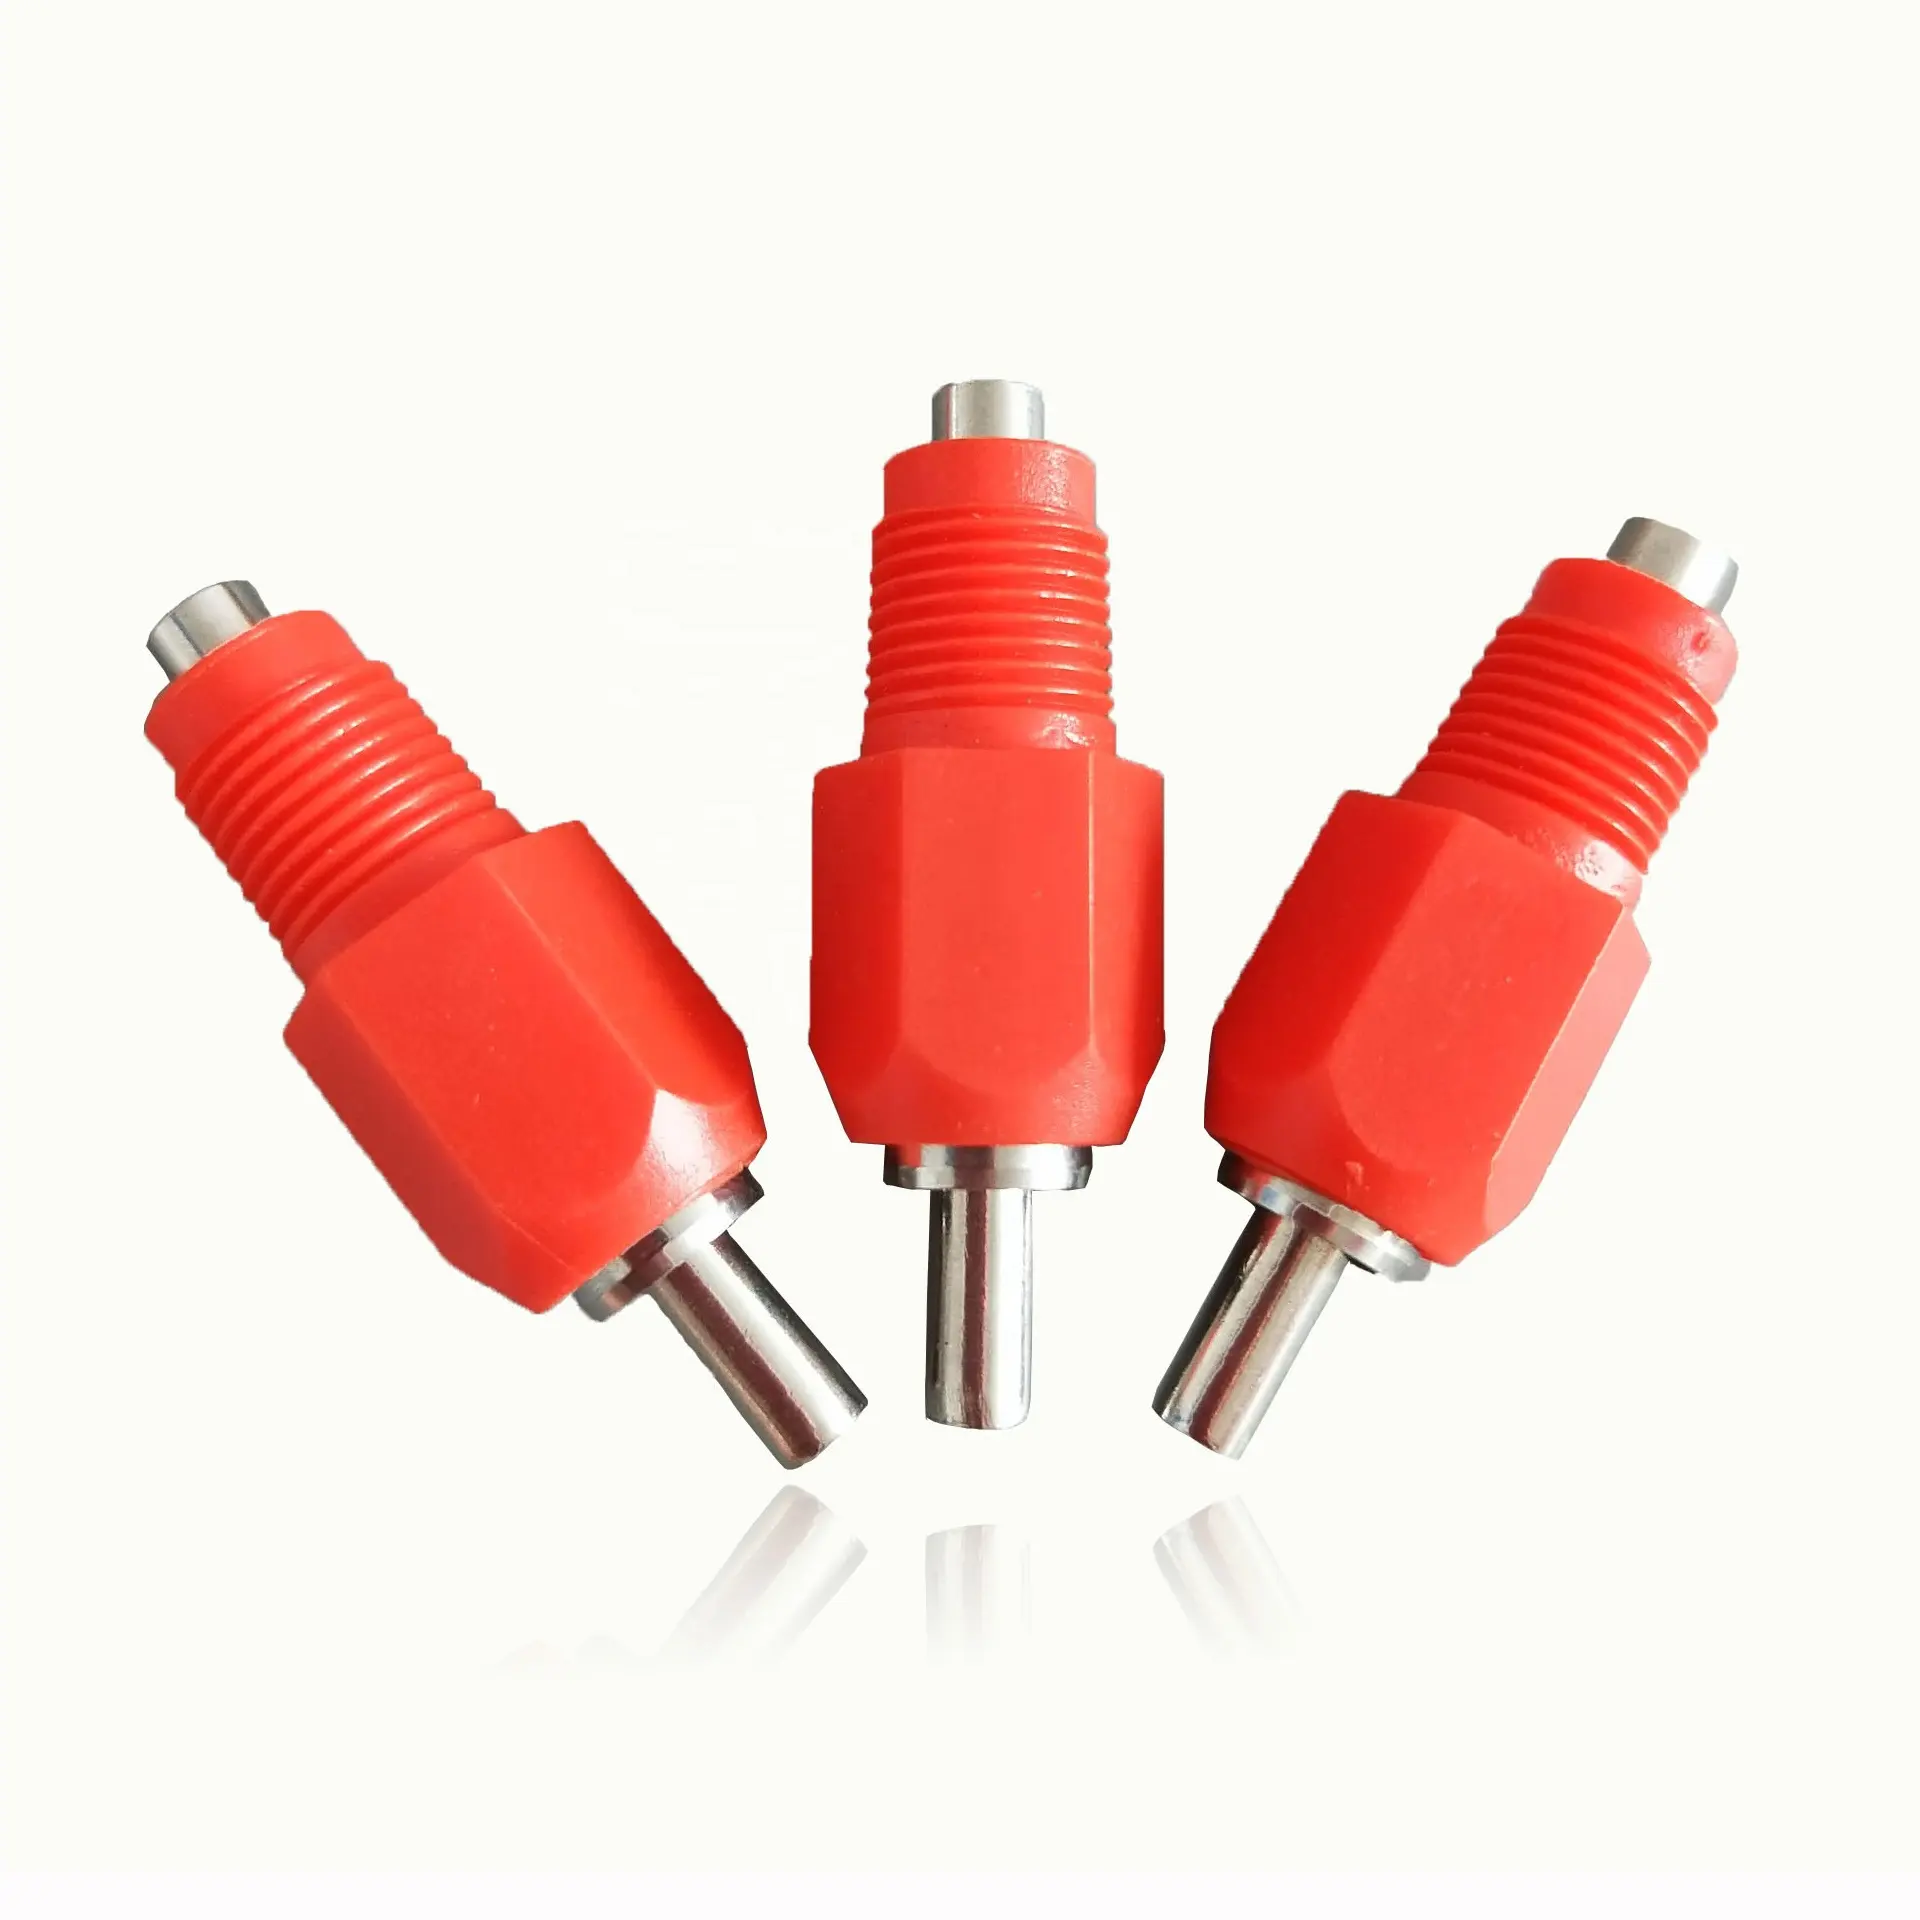 New Stype Red Threaded Chicken Nipple Drinker,Automatic Poultry Impex Water Drinker PH-12